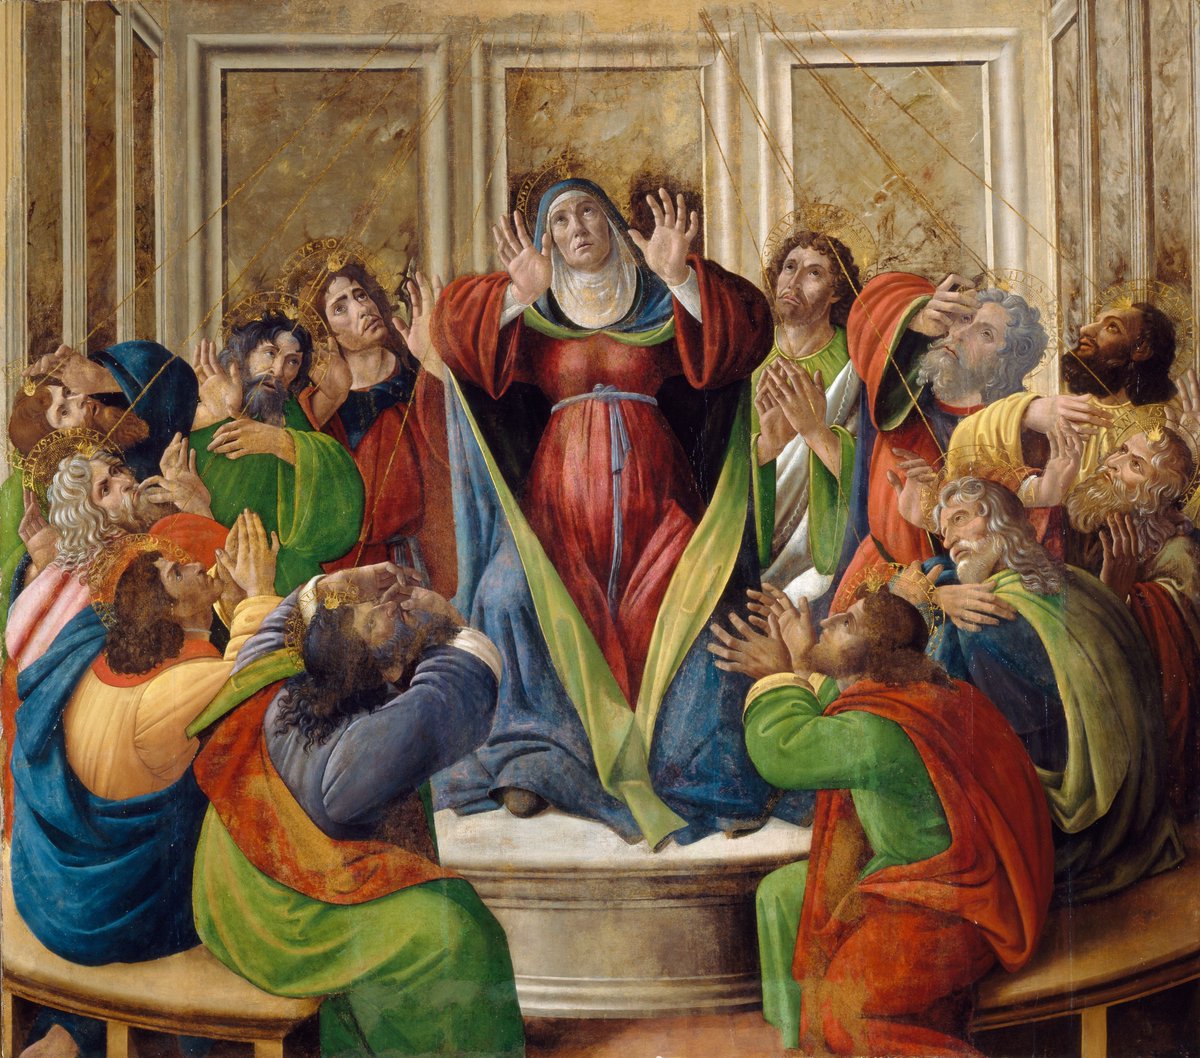 The Descent of the Holy Ghost by Sandro Botticelli, 1495-1505.